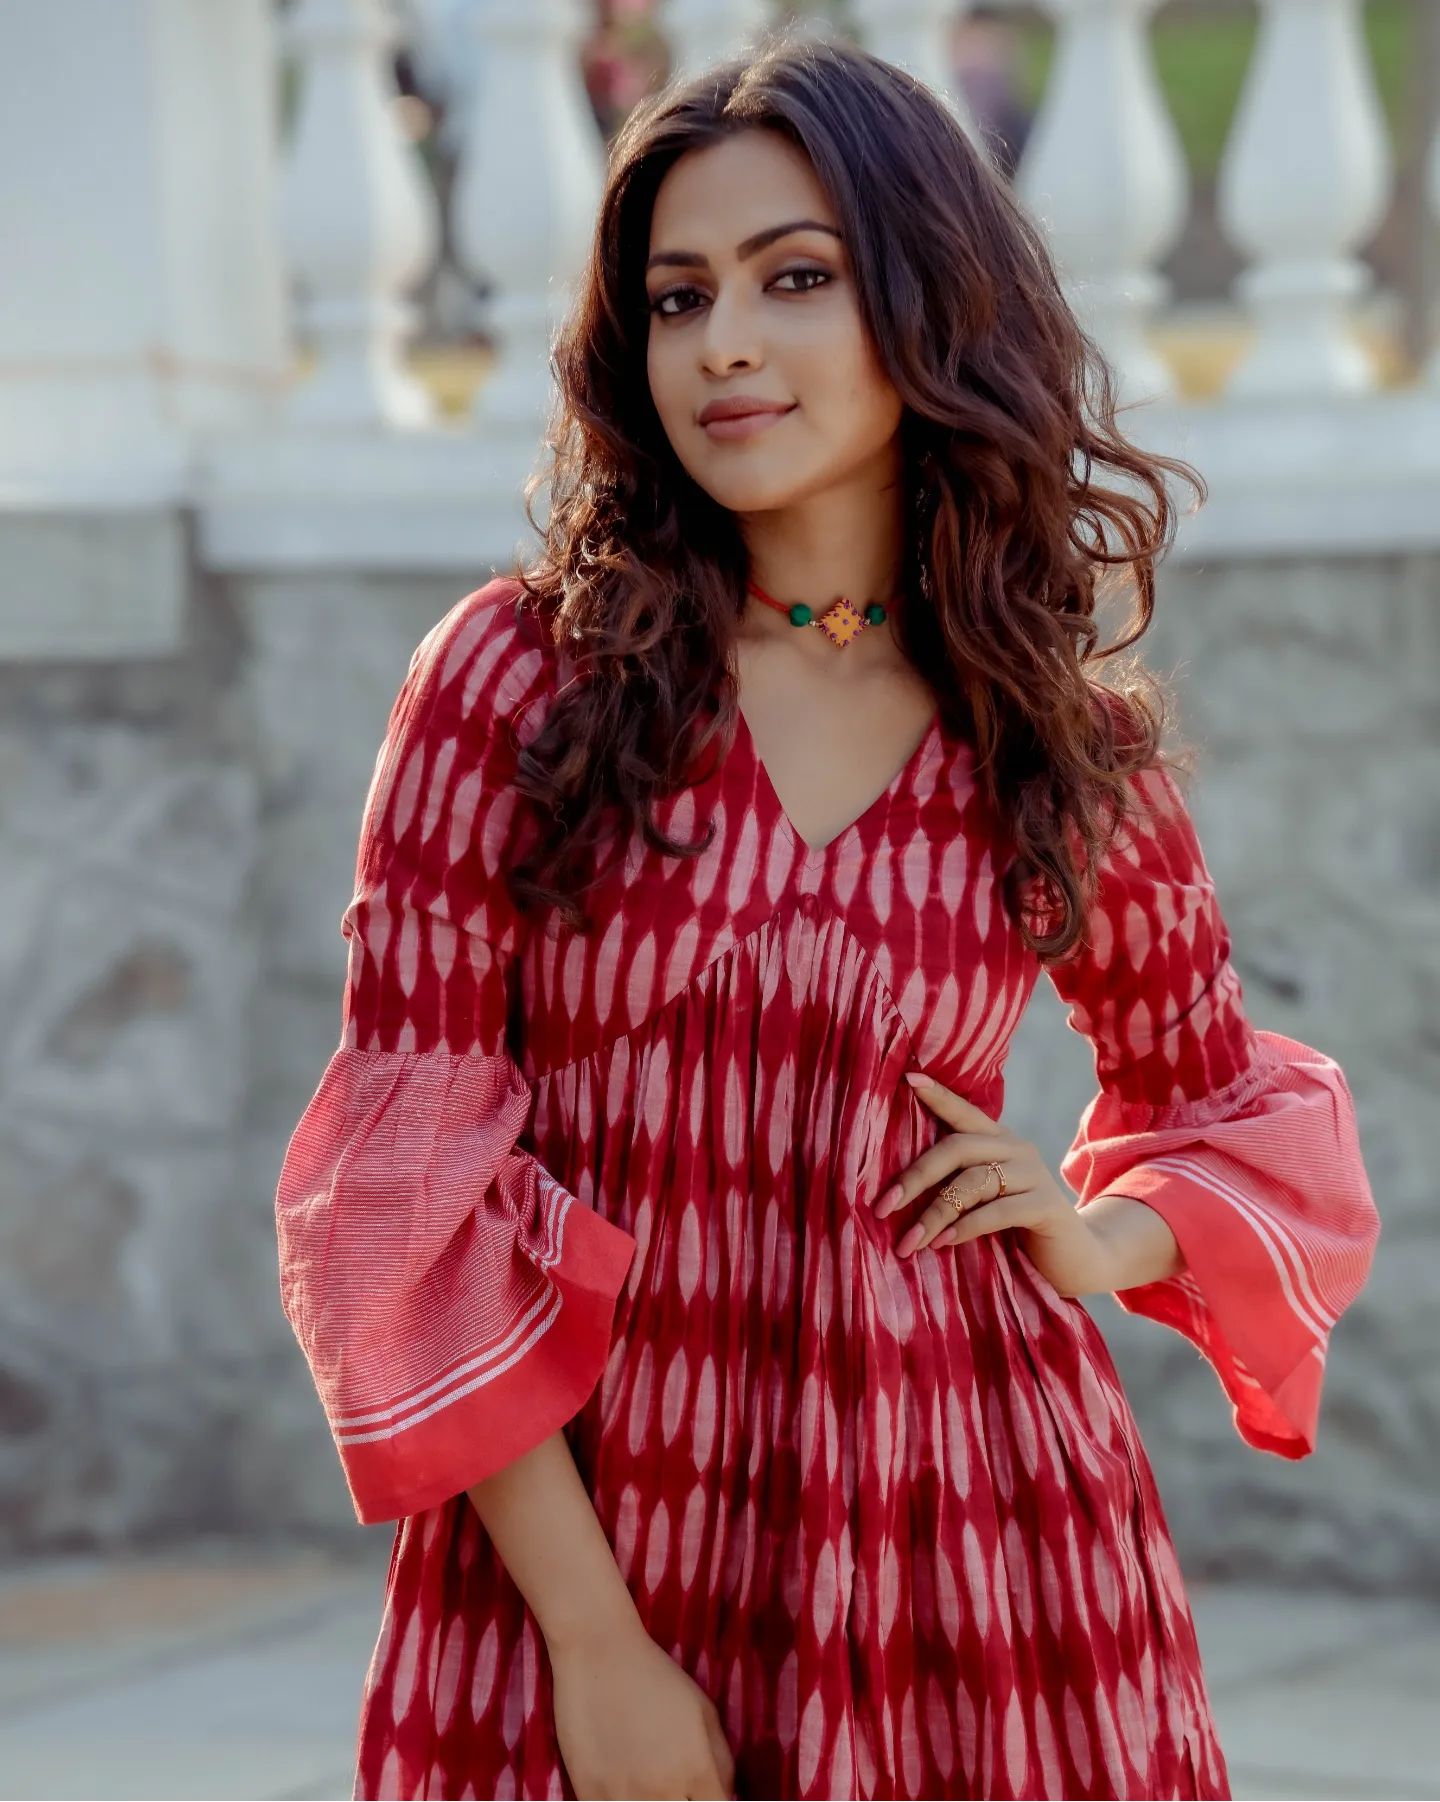 amala-paul-latest-photos-in-red-cotton-top-010